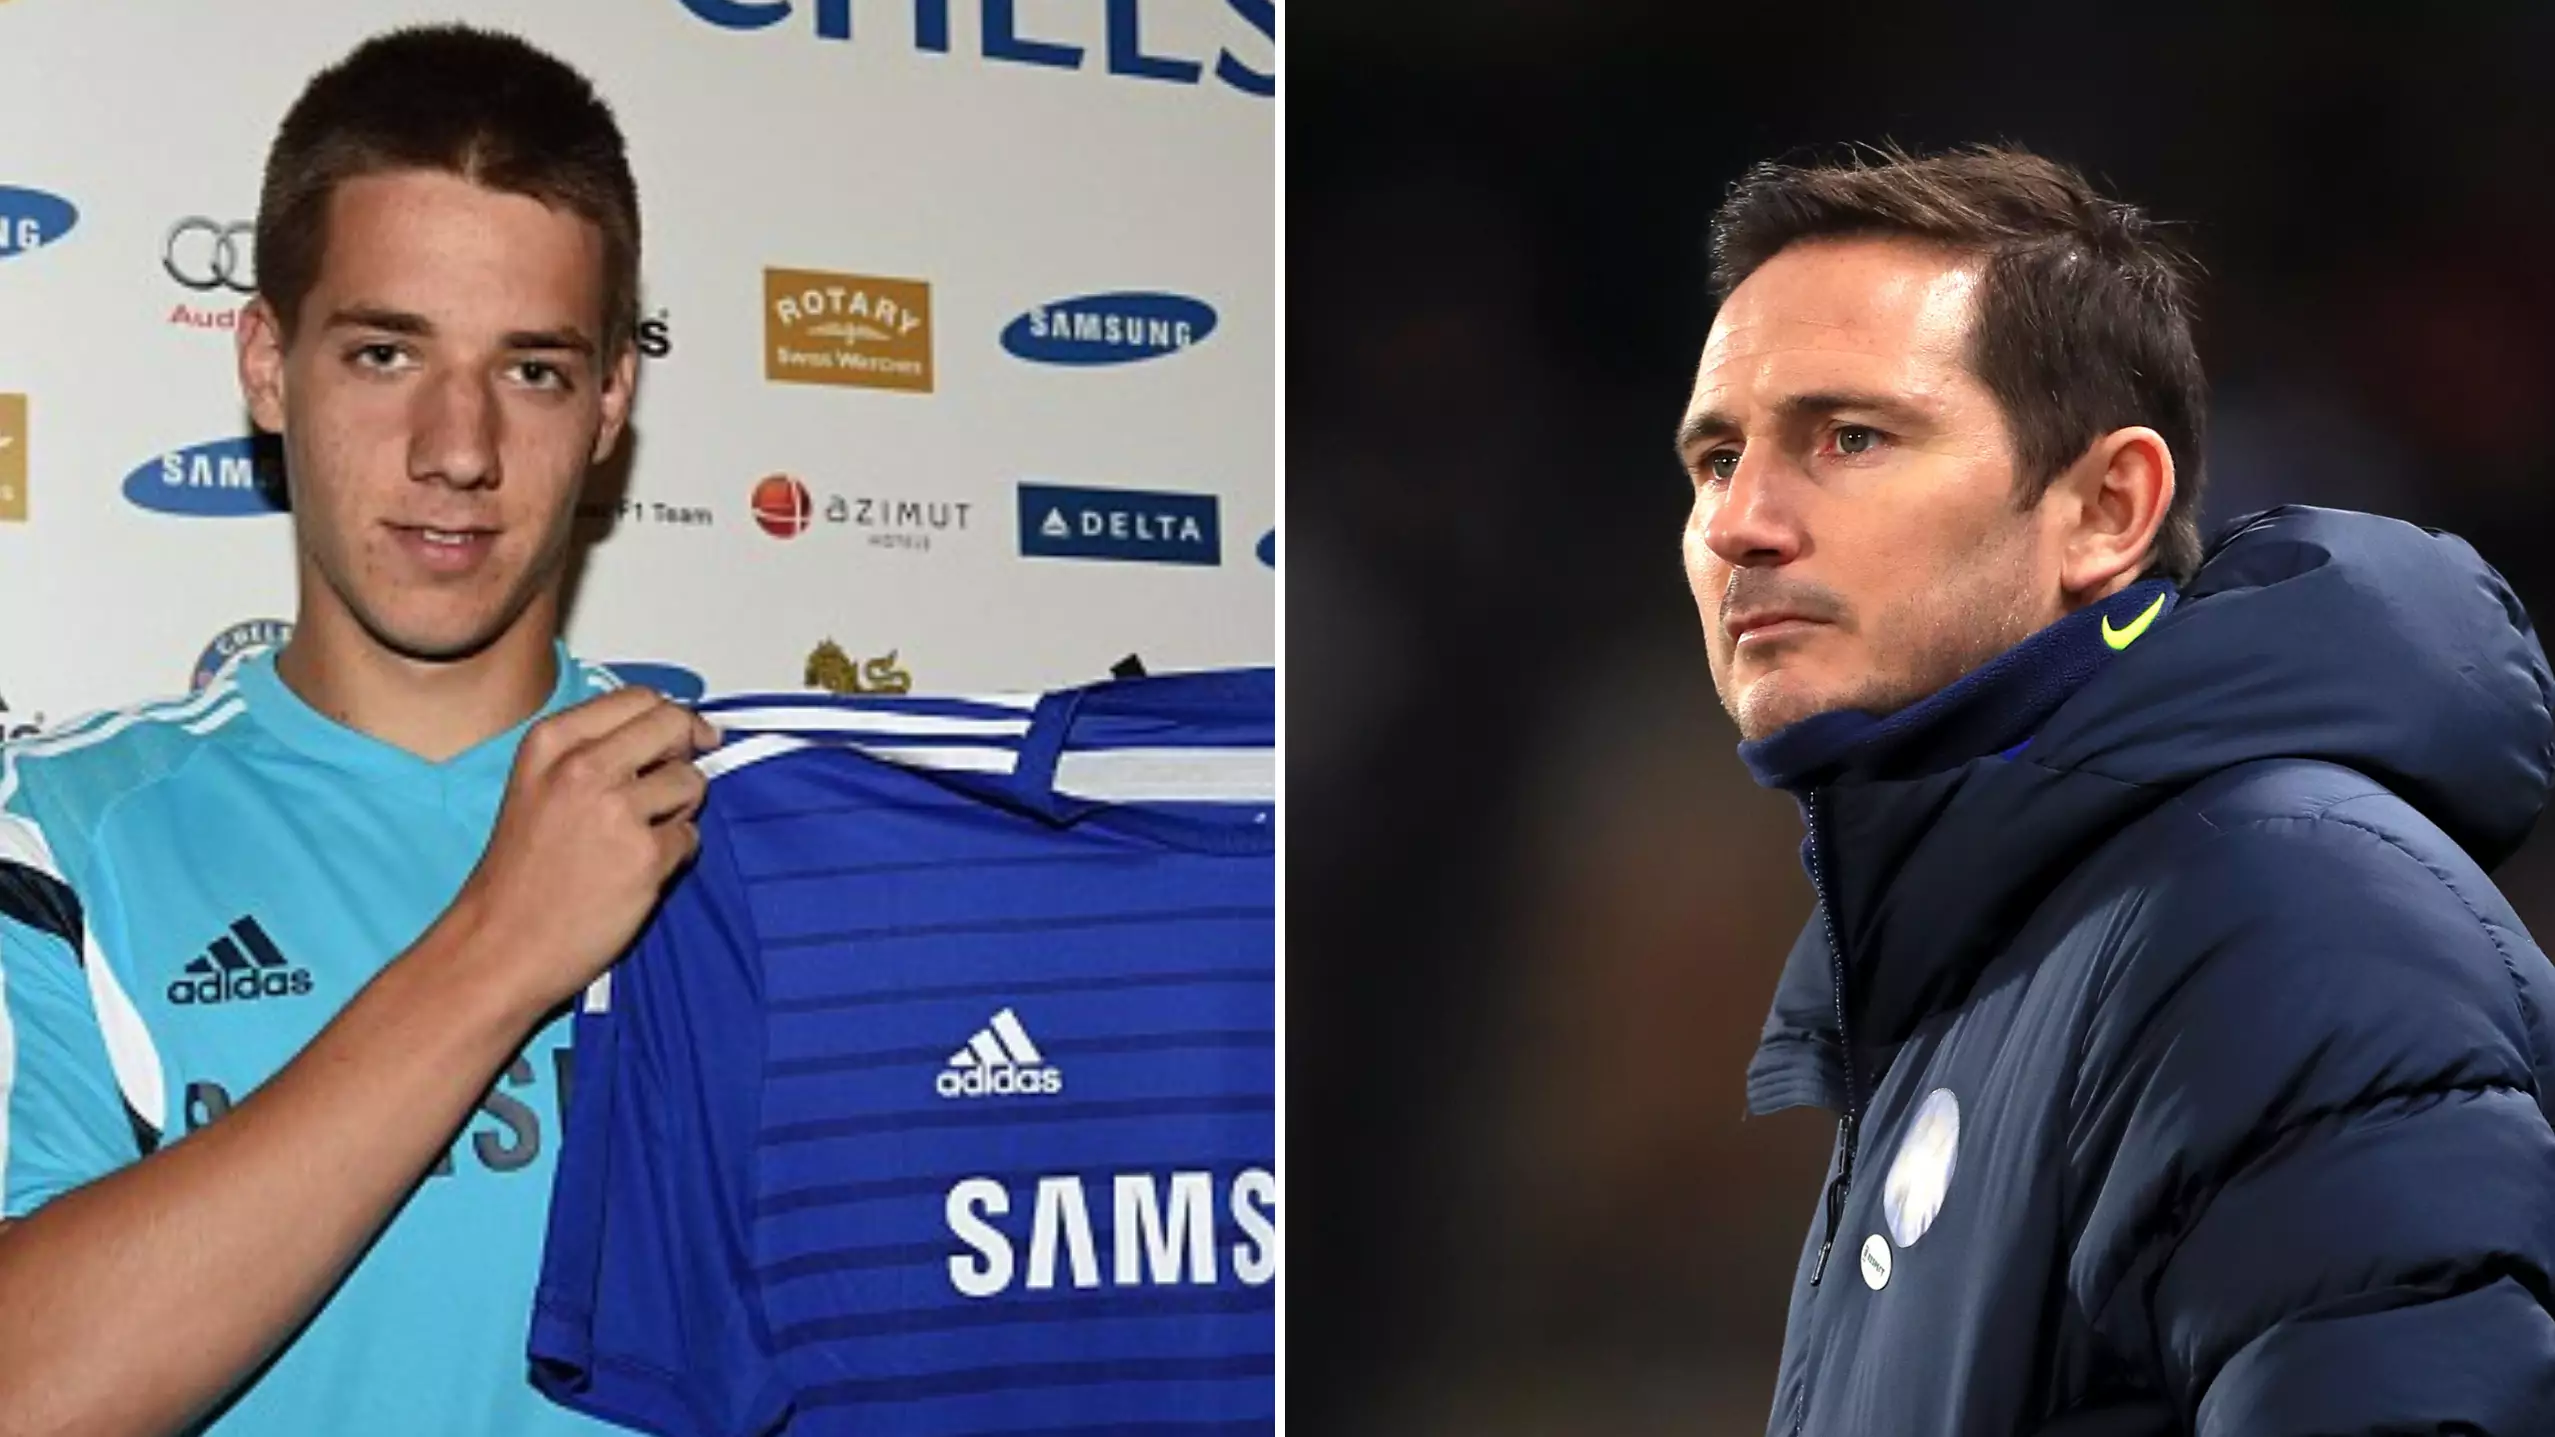 Chelsea To Make £10 Million Profit On Player Who Didn't Make A Single Appearance